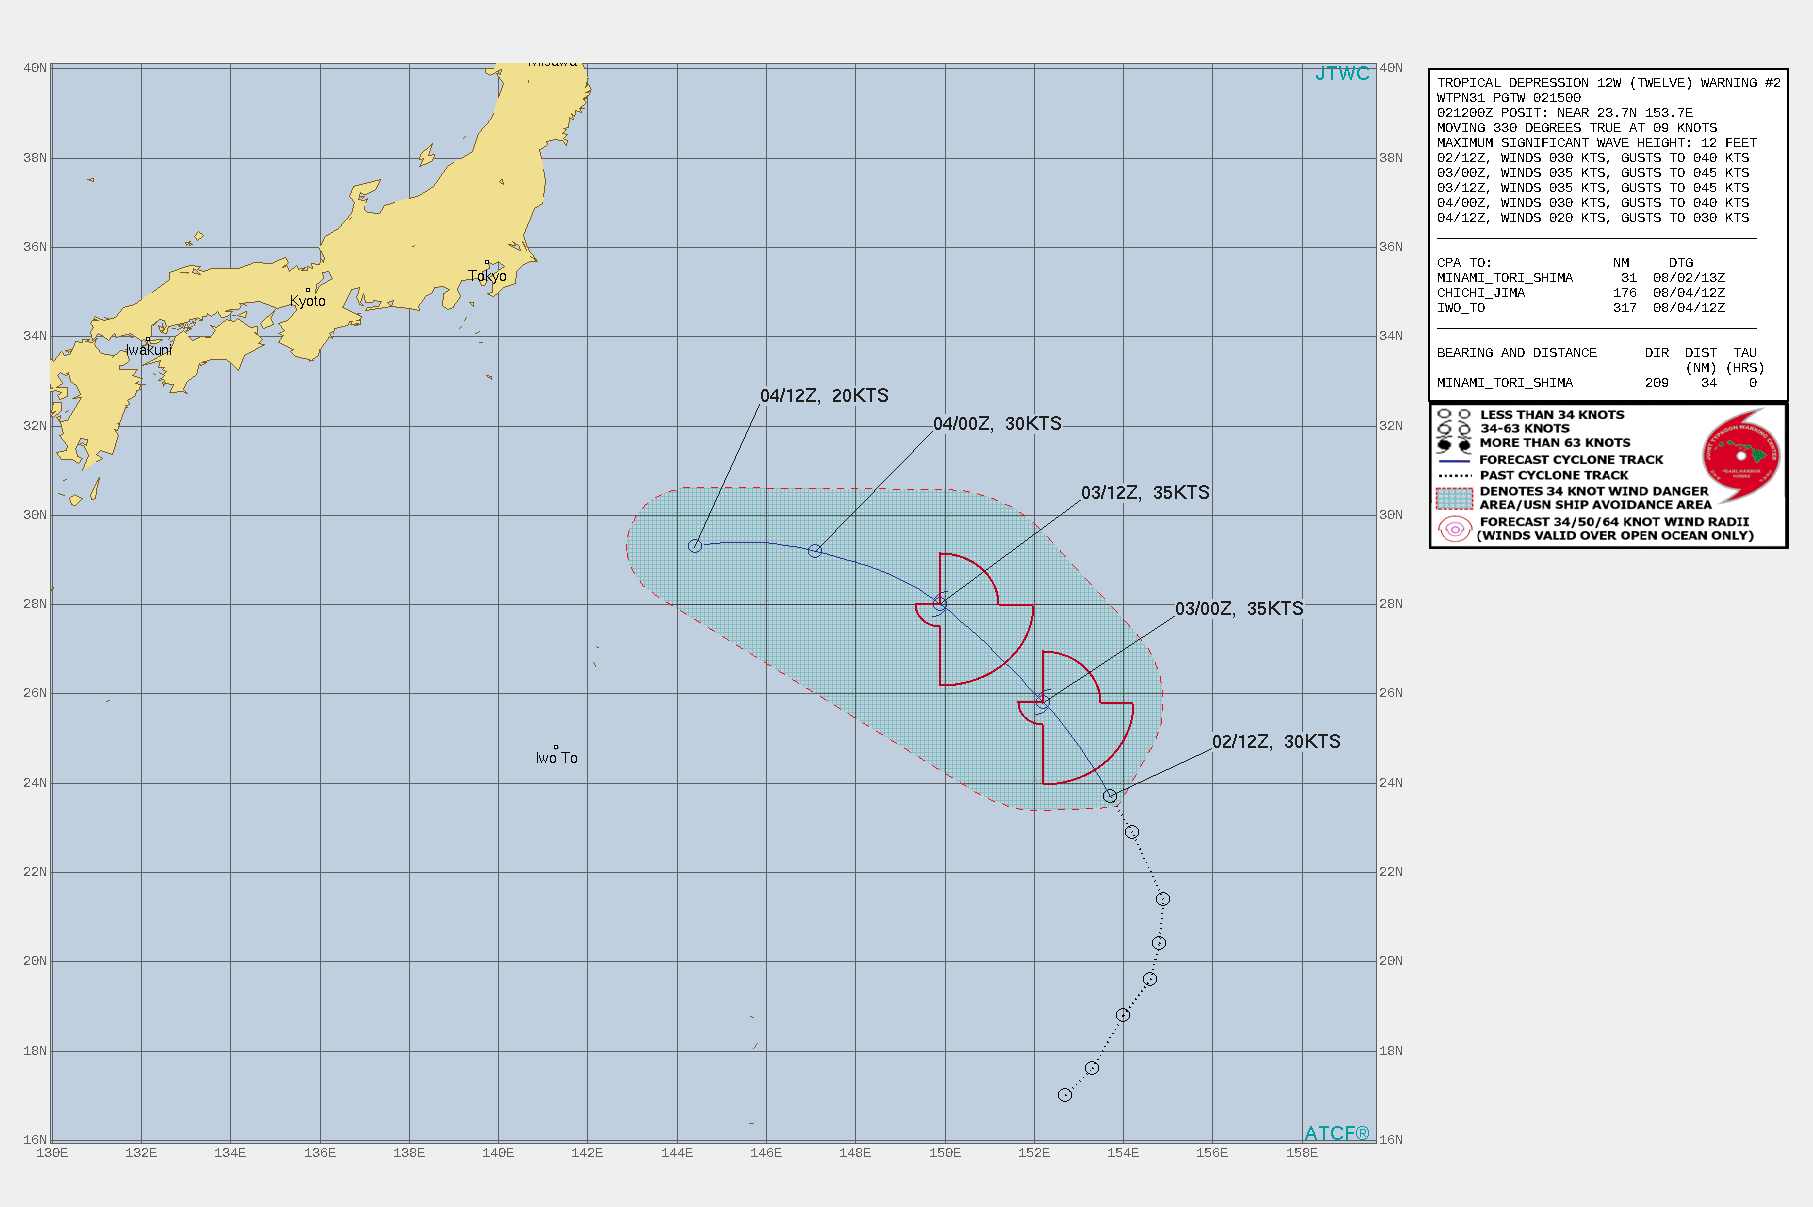 TD 12W. WARNING 2 ISSUED AT 02/15UTC.THERE ARE NO SIGNIFICANT CHANGES TO THE FORECAST FROM THE PREVIOUS WARNING.  FORECAST DISCUSSION: TD 12W IS FORECAST TO CONTINUE TRACKING NORTHWESTWARD THROUGH 24H ALONG THE SOUTHERN PERIPHERY OF THE SUBTROPICAL RIDGE TO THE NORTH. OVER THE NEXT 24 HOURS, INVEST AREA 99W IS EXPECTED TO CONSOLIDATE AND TRACK RAPIDLY NORTHWARD, MOVING TO WITHIN 1100 KM OF TD 12W BY 24H. THEREAFTER THE TWO SYSTEMS WILL MOVE STEADILY CLOSER TO ONE ANOTHER AND TD 12W IS EXPECTED TO BE CAPTURED BY 99W BY 36H, AND BEGIN BINARY INTERACATION. TD 12W WILL BEGIN TRACKING WEST OR EVEN SOUTHWEST AFTER 36H AS IT SPIRALS STEADILY CLOSER TOWARDS 99W, ULTIMATELY MERGING WITH 99W AT OR SLIGHTLY AFTER 48H. THE UPPER-LEVEL ENVIRONMENT HAS SLOWLY IMPROVED OVER THE PAST SIX HOURS, WITH THE TUTT CELL CONTINUING TO MOVE OFF TOWARDS THE WEST, ALLOWING FOR THE SYSTEM TO TAP INTO A BIT OF DIFFLUENT OUTFLOW, RESULTING IN THE ENHANCED CONVECTIVE ACTIVTY CURRENTLY ONGOING. AS THE ORIENTATION OF THE TUTT SHIFTS SLIGHTLY OVER THE NEXT 24 HOURS, SHEAR SHOULD DECREASE TO MORE MODERATE LEVELS ALLOWING FOR A SLIGHT INTENSIFICATION THROUGH 24H. THEREAFTER, THE COMBINATION OF DISRUPTION ON THE LOW-LEVEL INFLOW PATTERN DUE TO INTERACTION WITH 99W AND THE INFLUENCE OF THE MASS CONVERGENCE ALOFT FROM THE OUTFLOW ASSOCIATED WITH THE DEVELOPMENT OF 99W, WILL SERVE TO RAPIDLY WEAKEN AND DISSIPATE TD 12W BY 48H.